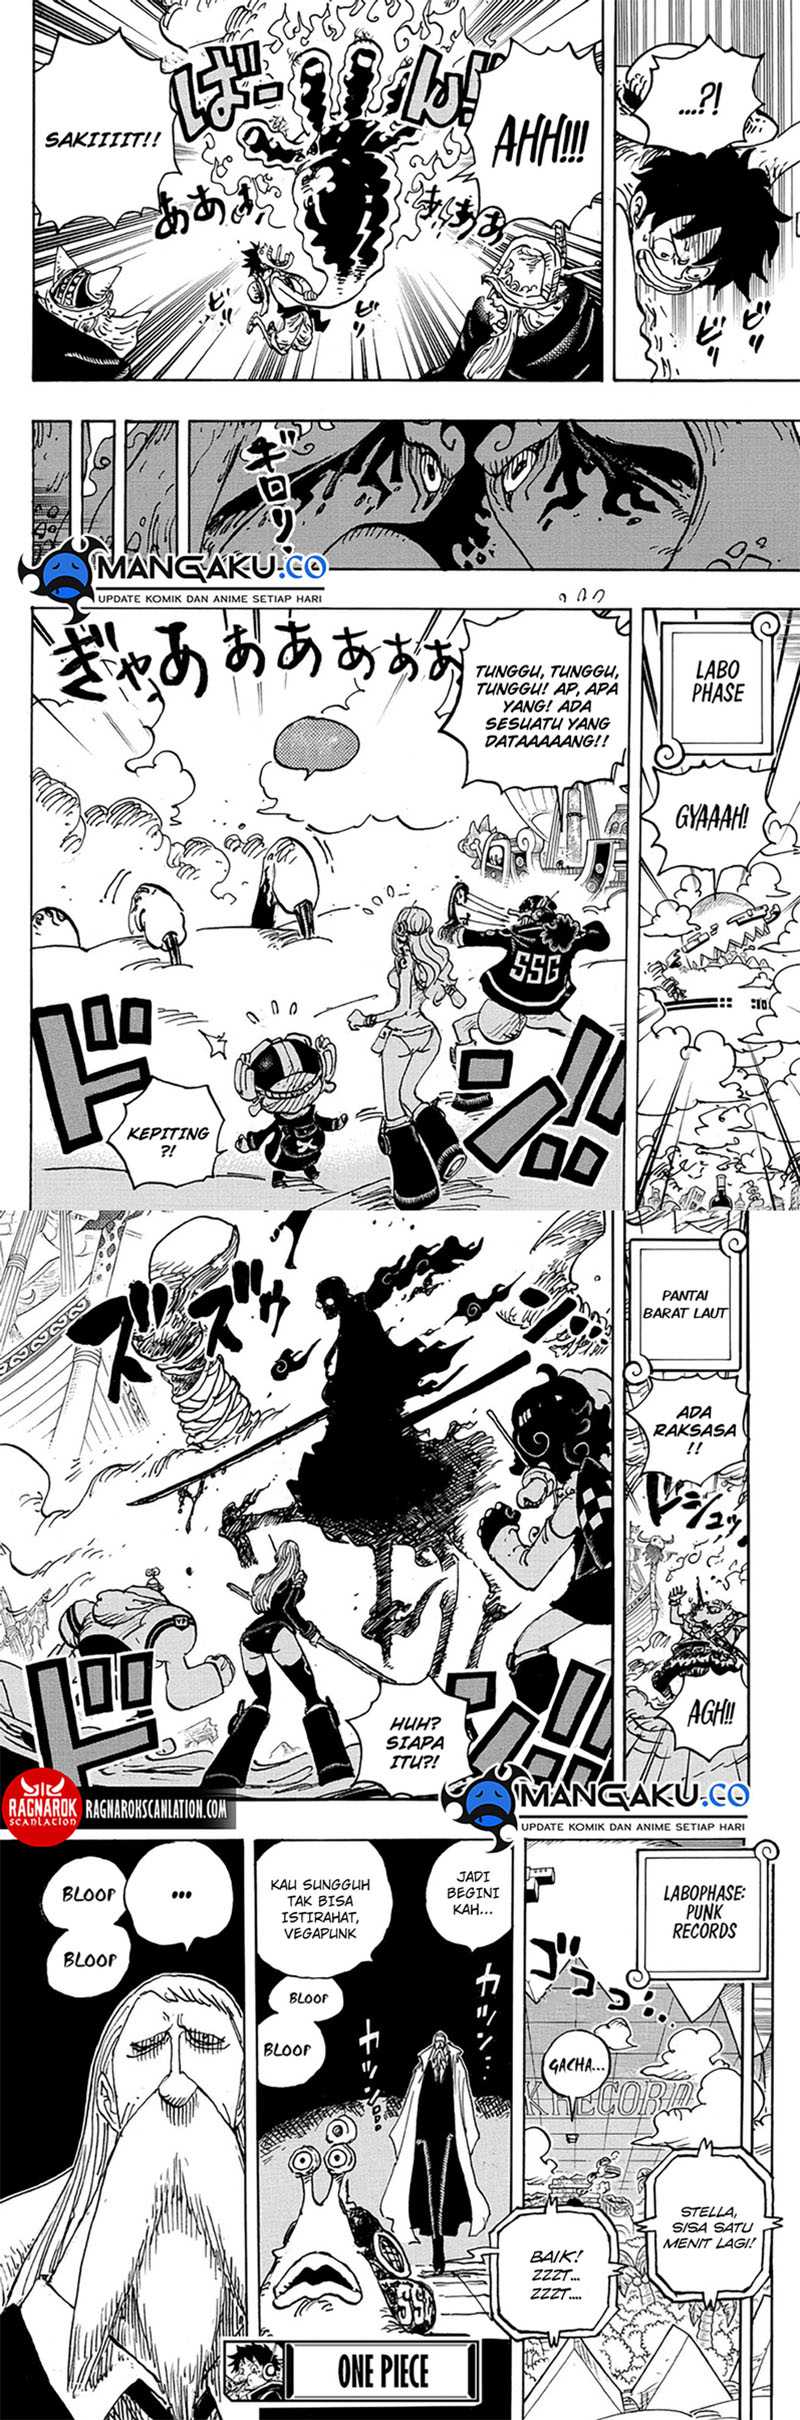 One Piece Chapter 1112